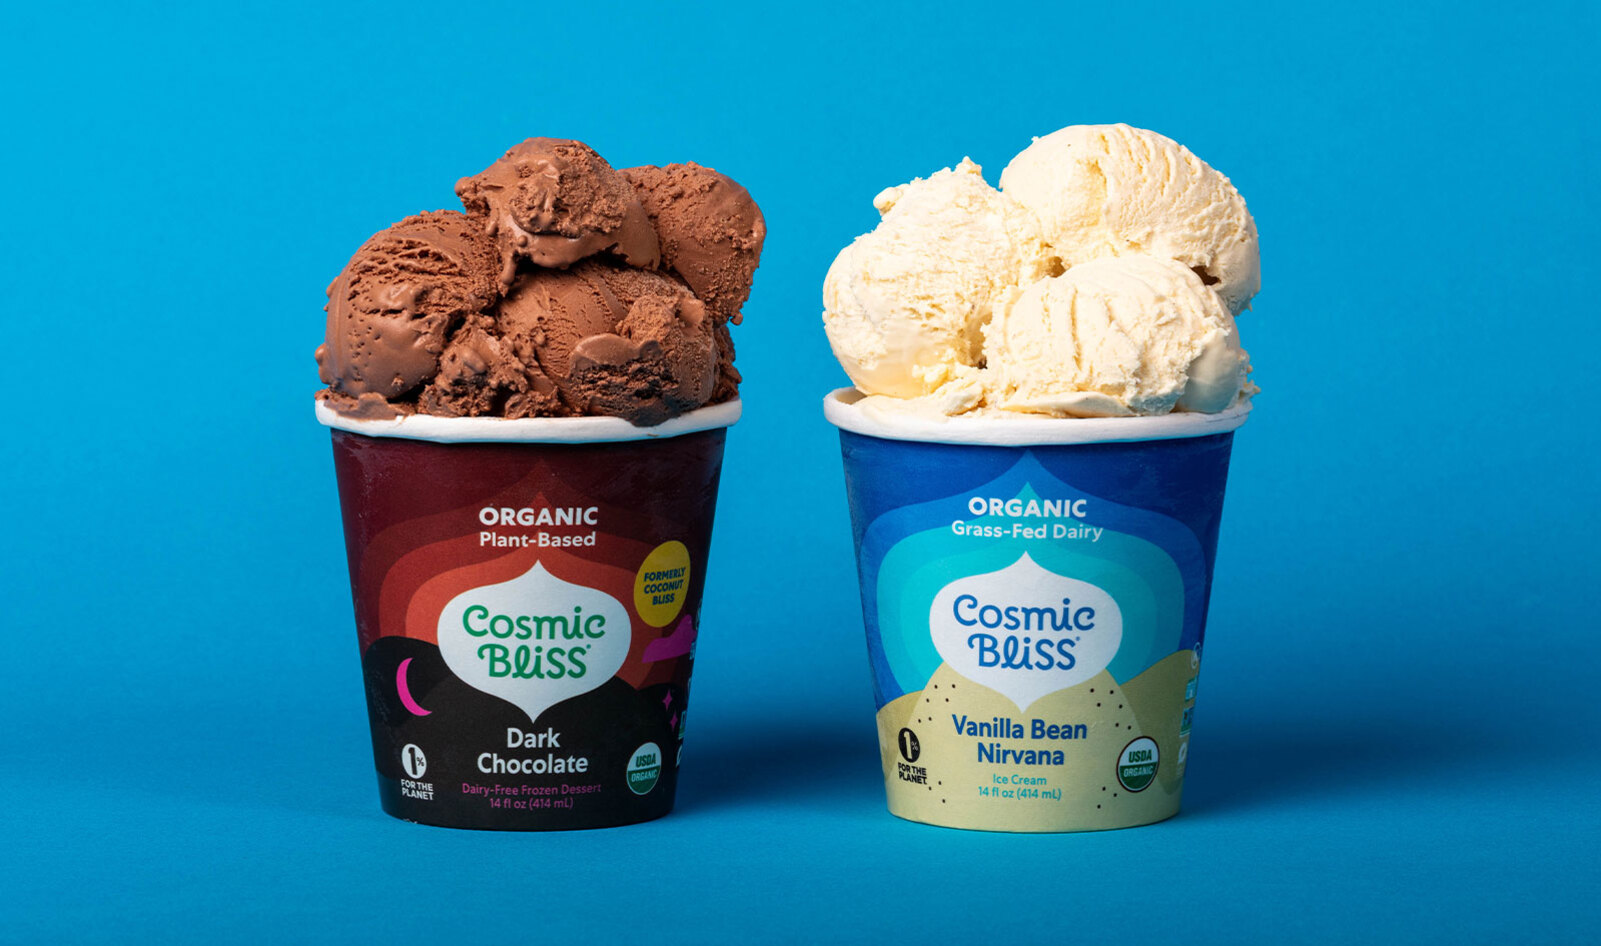 Once a Beloved Vegan Ice Cream Brand, Coconut Bliss' New Dairy Line Outrages Customers